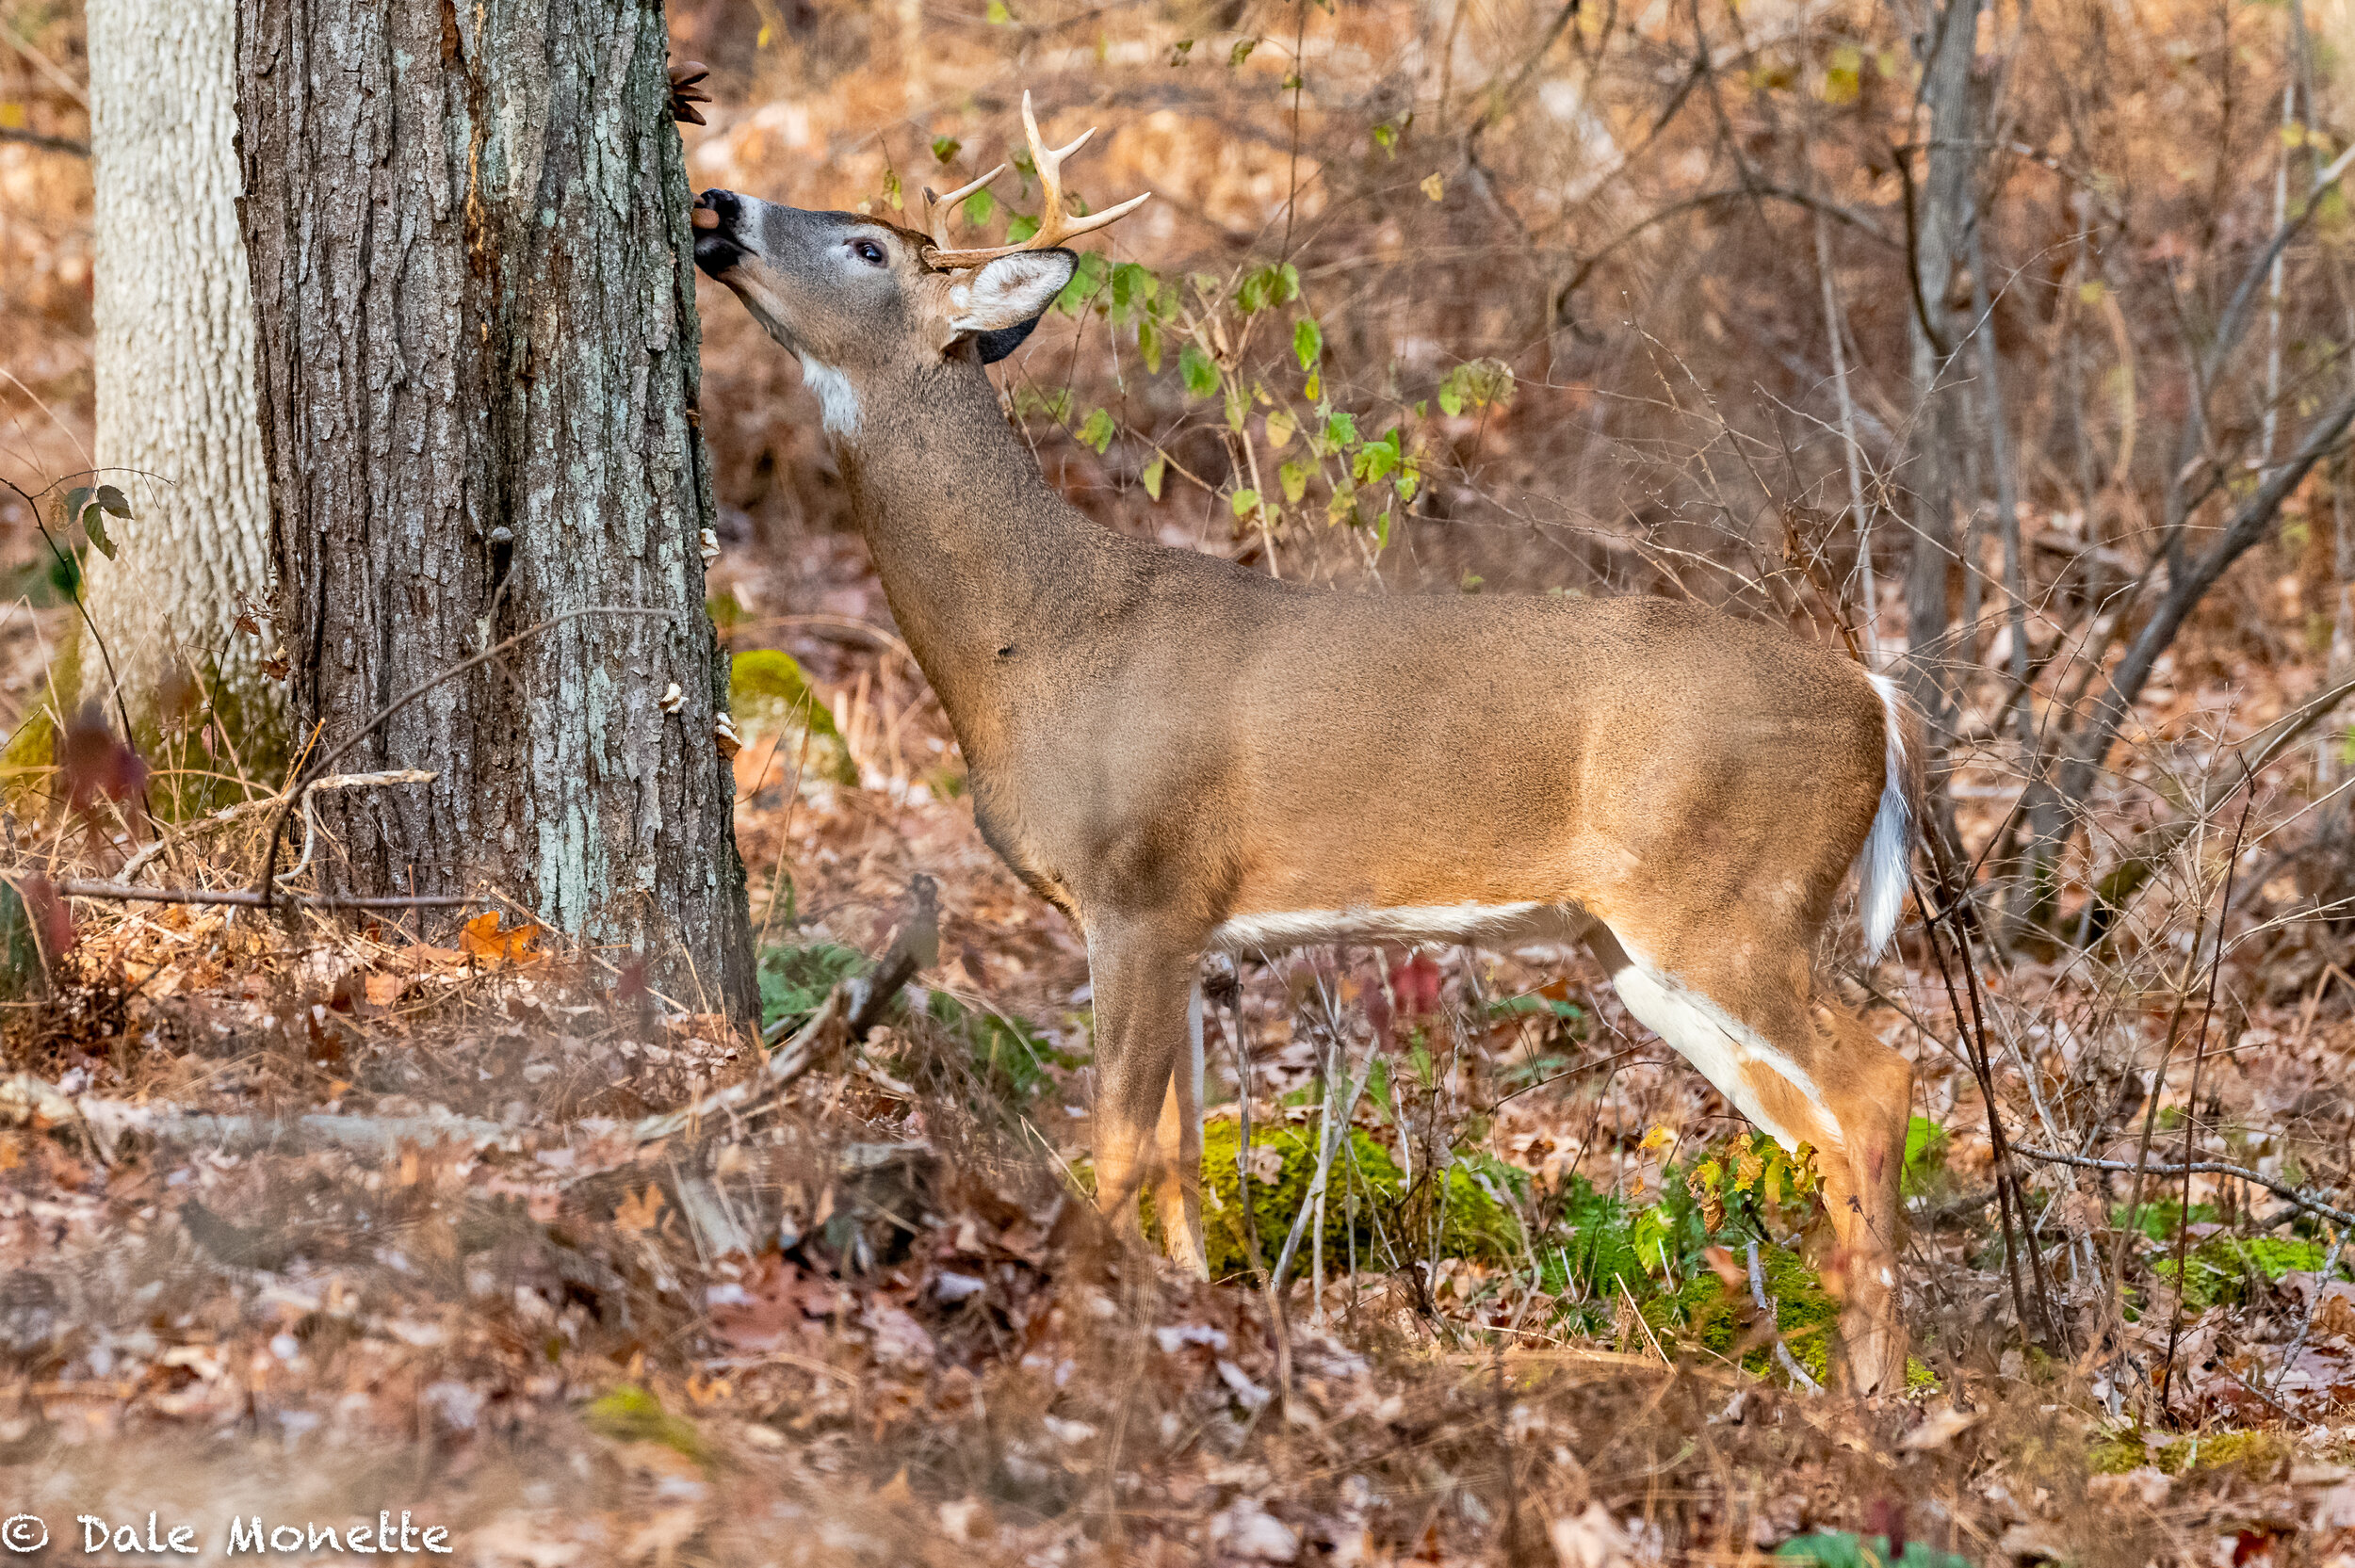   A white-tailed buck world away and eating his fill of fungi that grows on the side of trees. he watched me for a few minutes and then went back to feeding.  